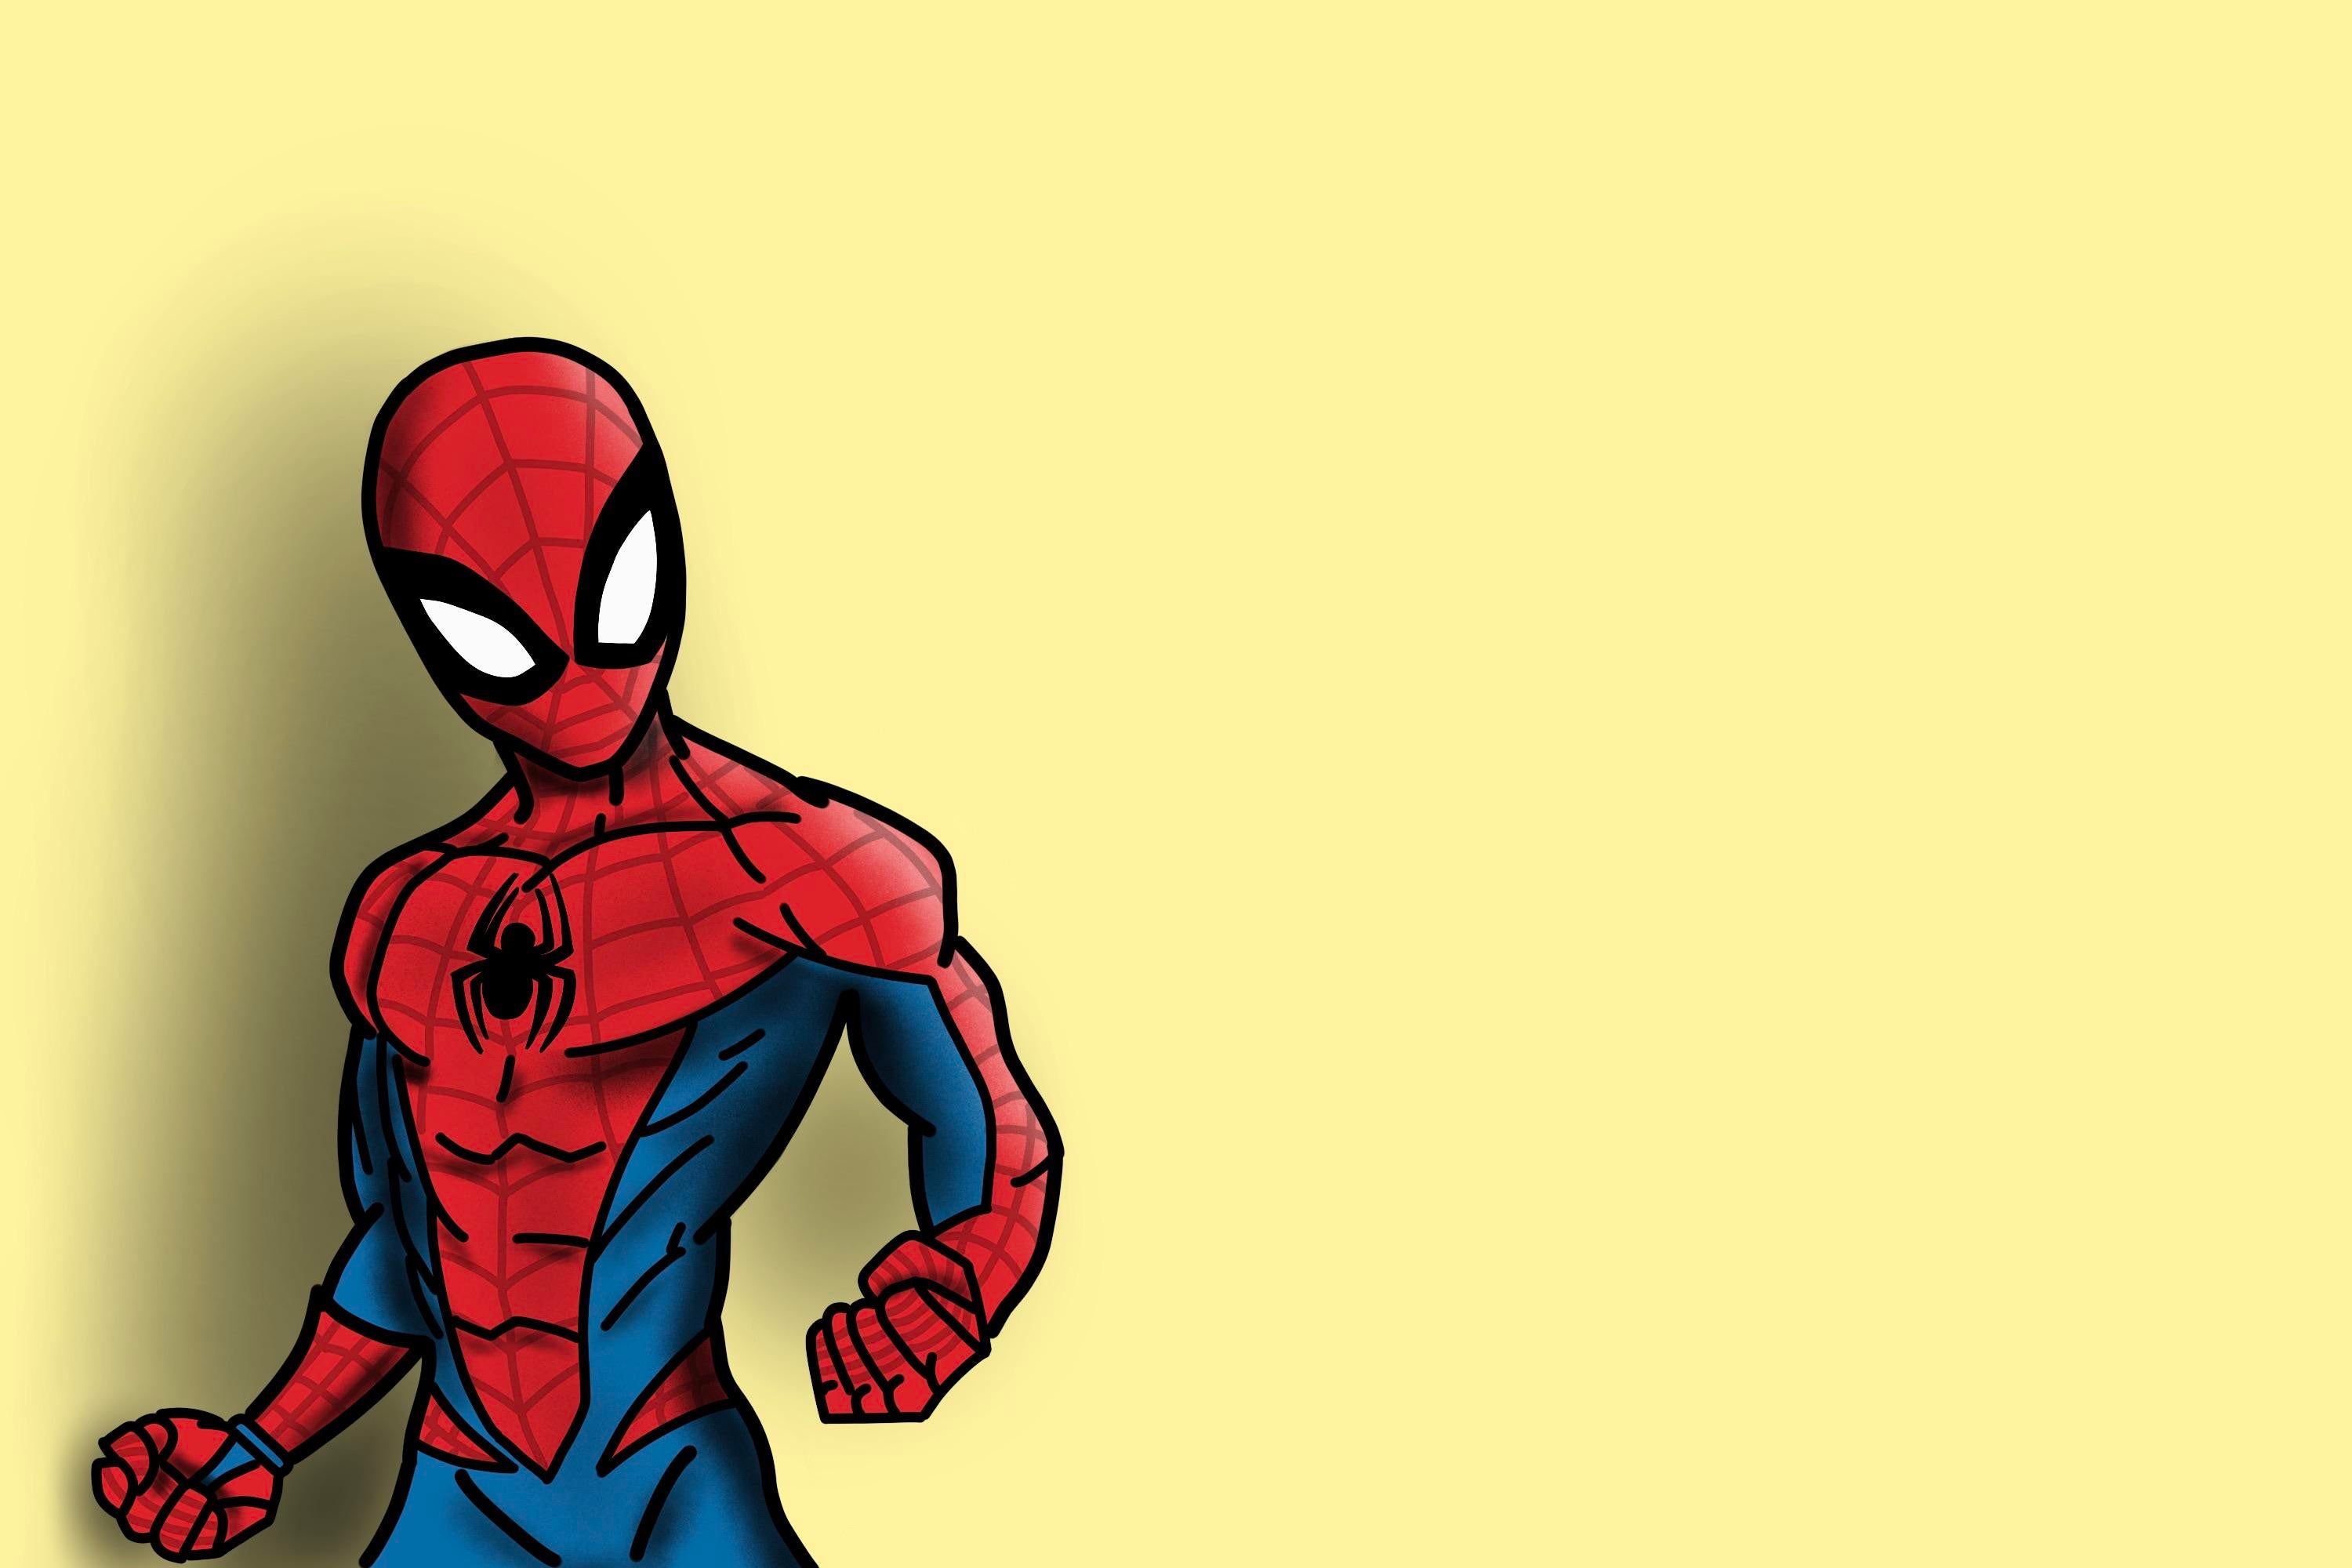 Any Spider Man Fans Here? I Made This On Procreate